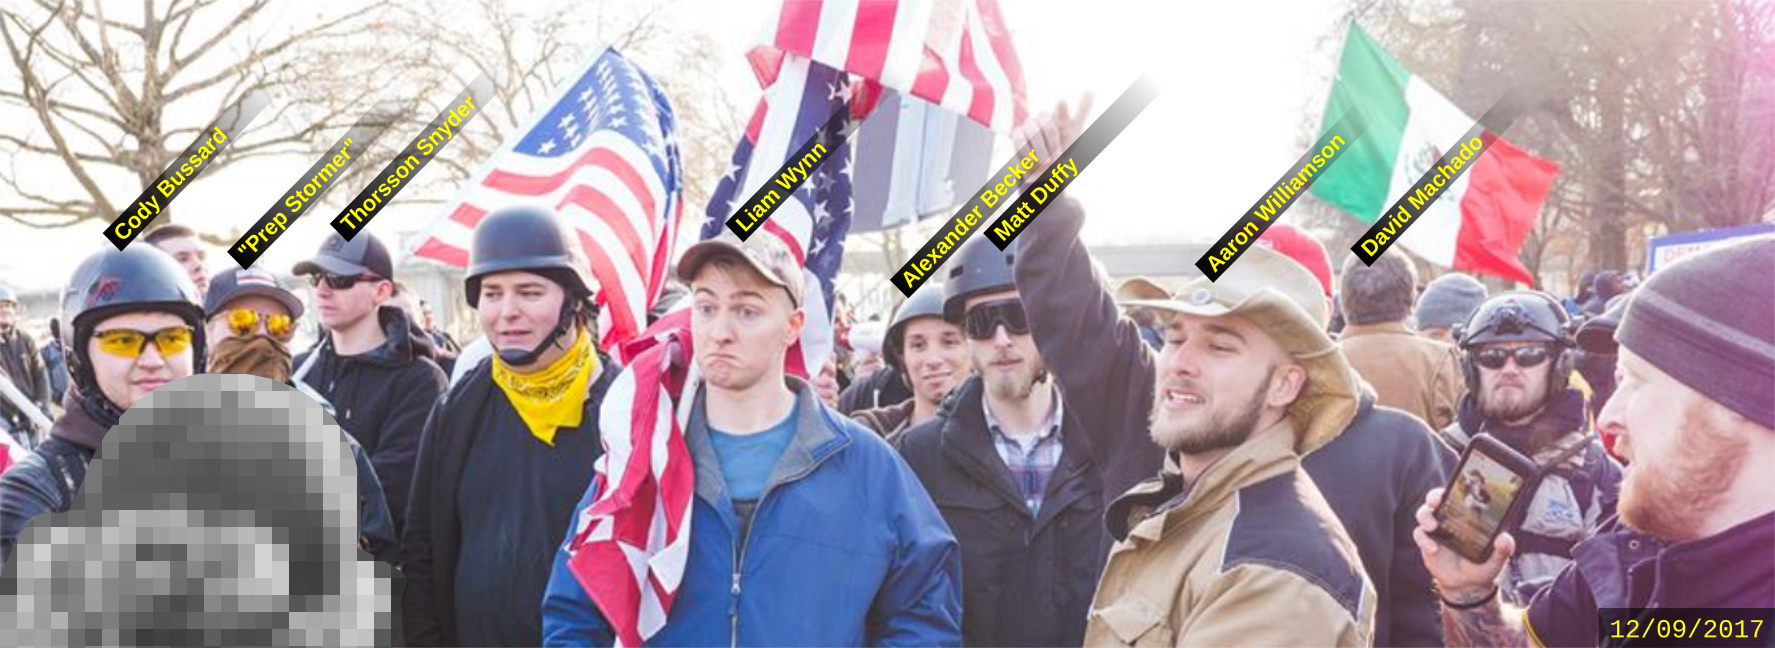 Aaron Williamson attends an anti-immigrant hate rally